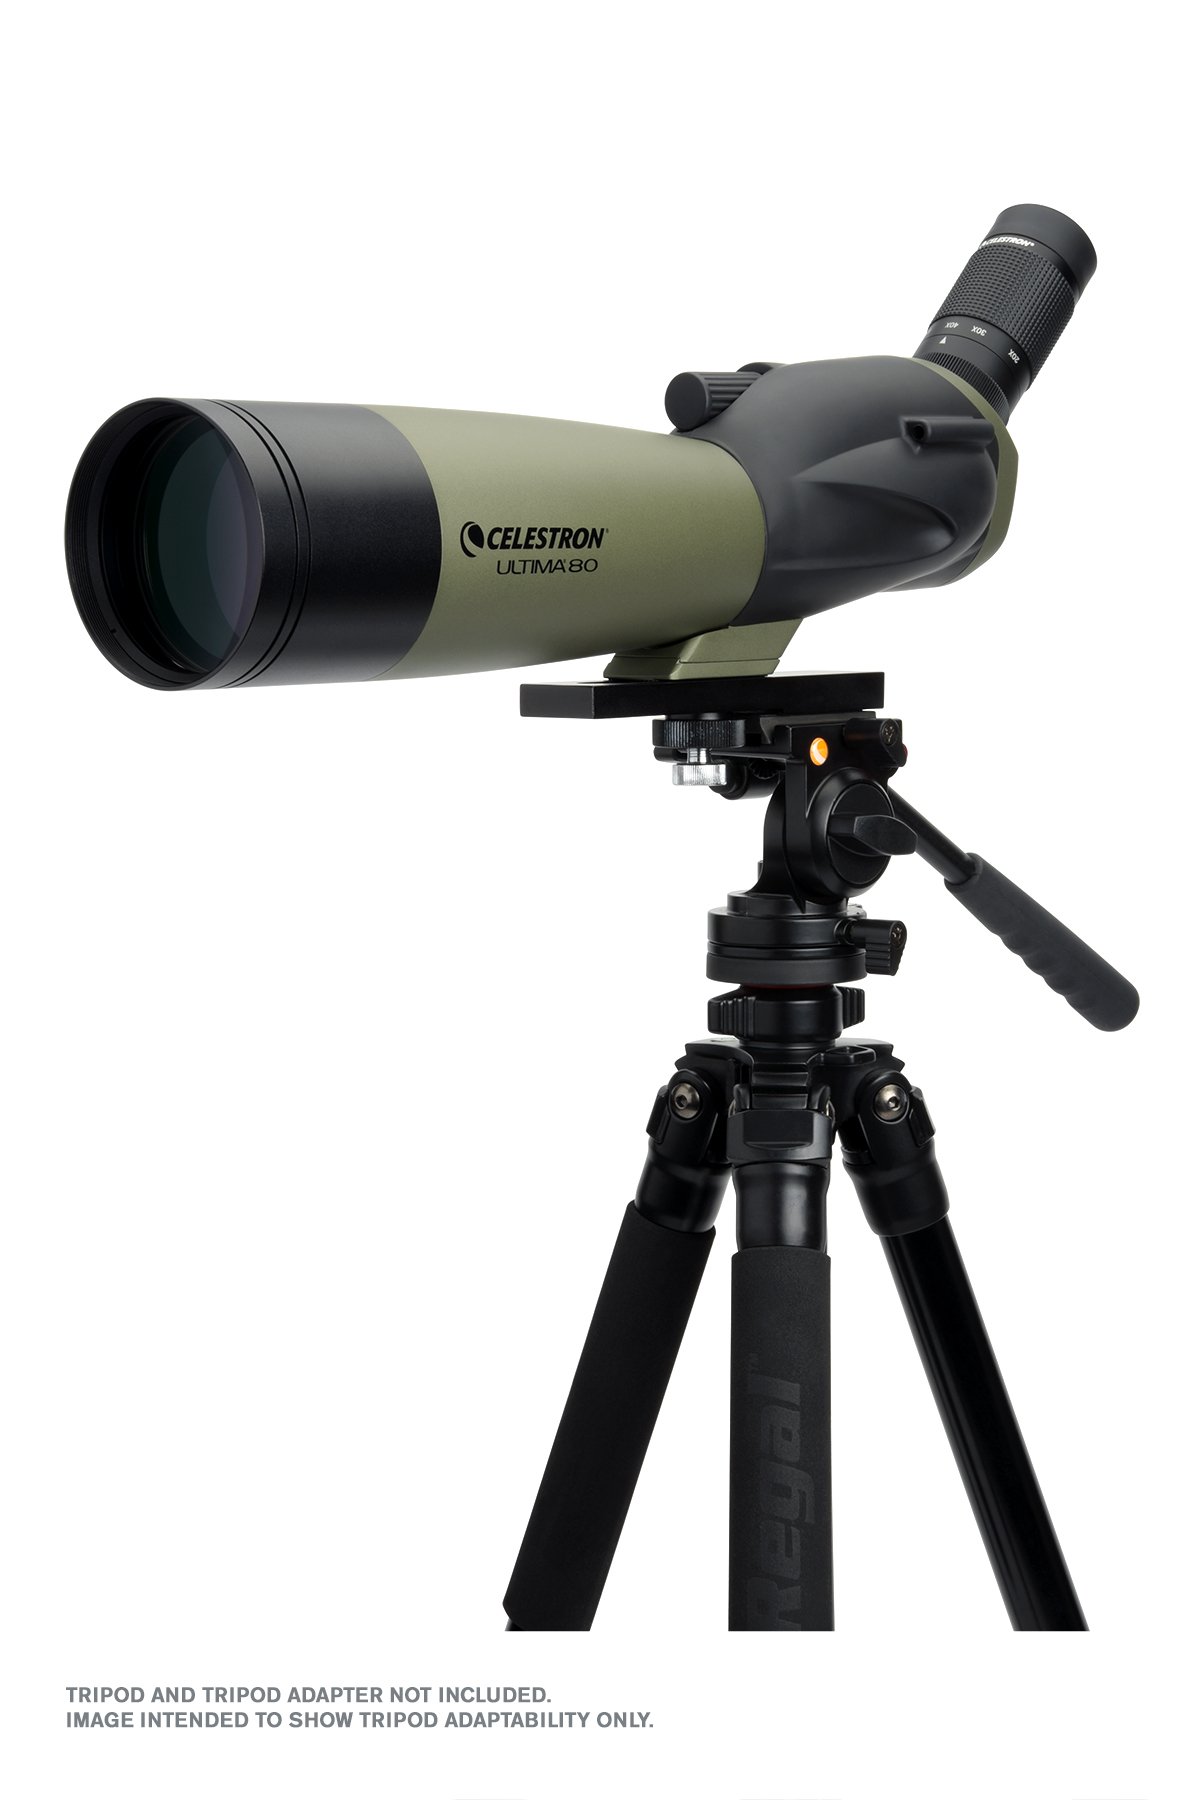 Celestron – Ultima 80 Angled Spotting Scope – 20-60x Zoom Eyepiece – Multi-coated Optics for Bird Watching, Wildlife, Scenery and Hunting – Waterproof and Fogproof – Includes Soft Carrying Case